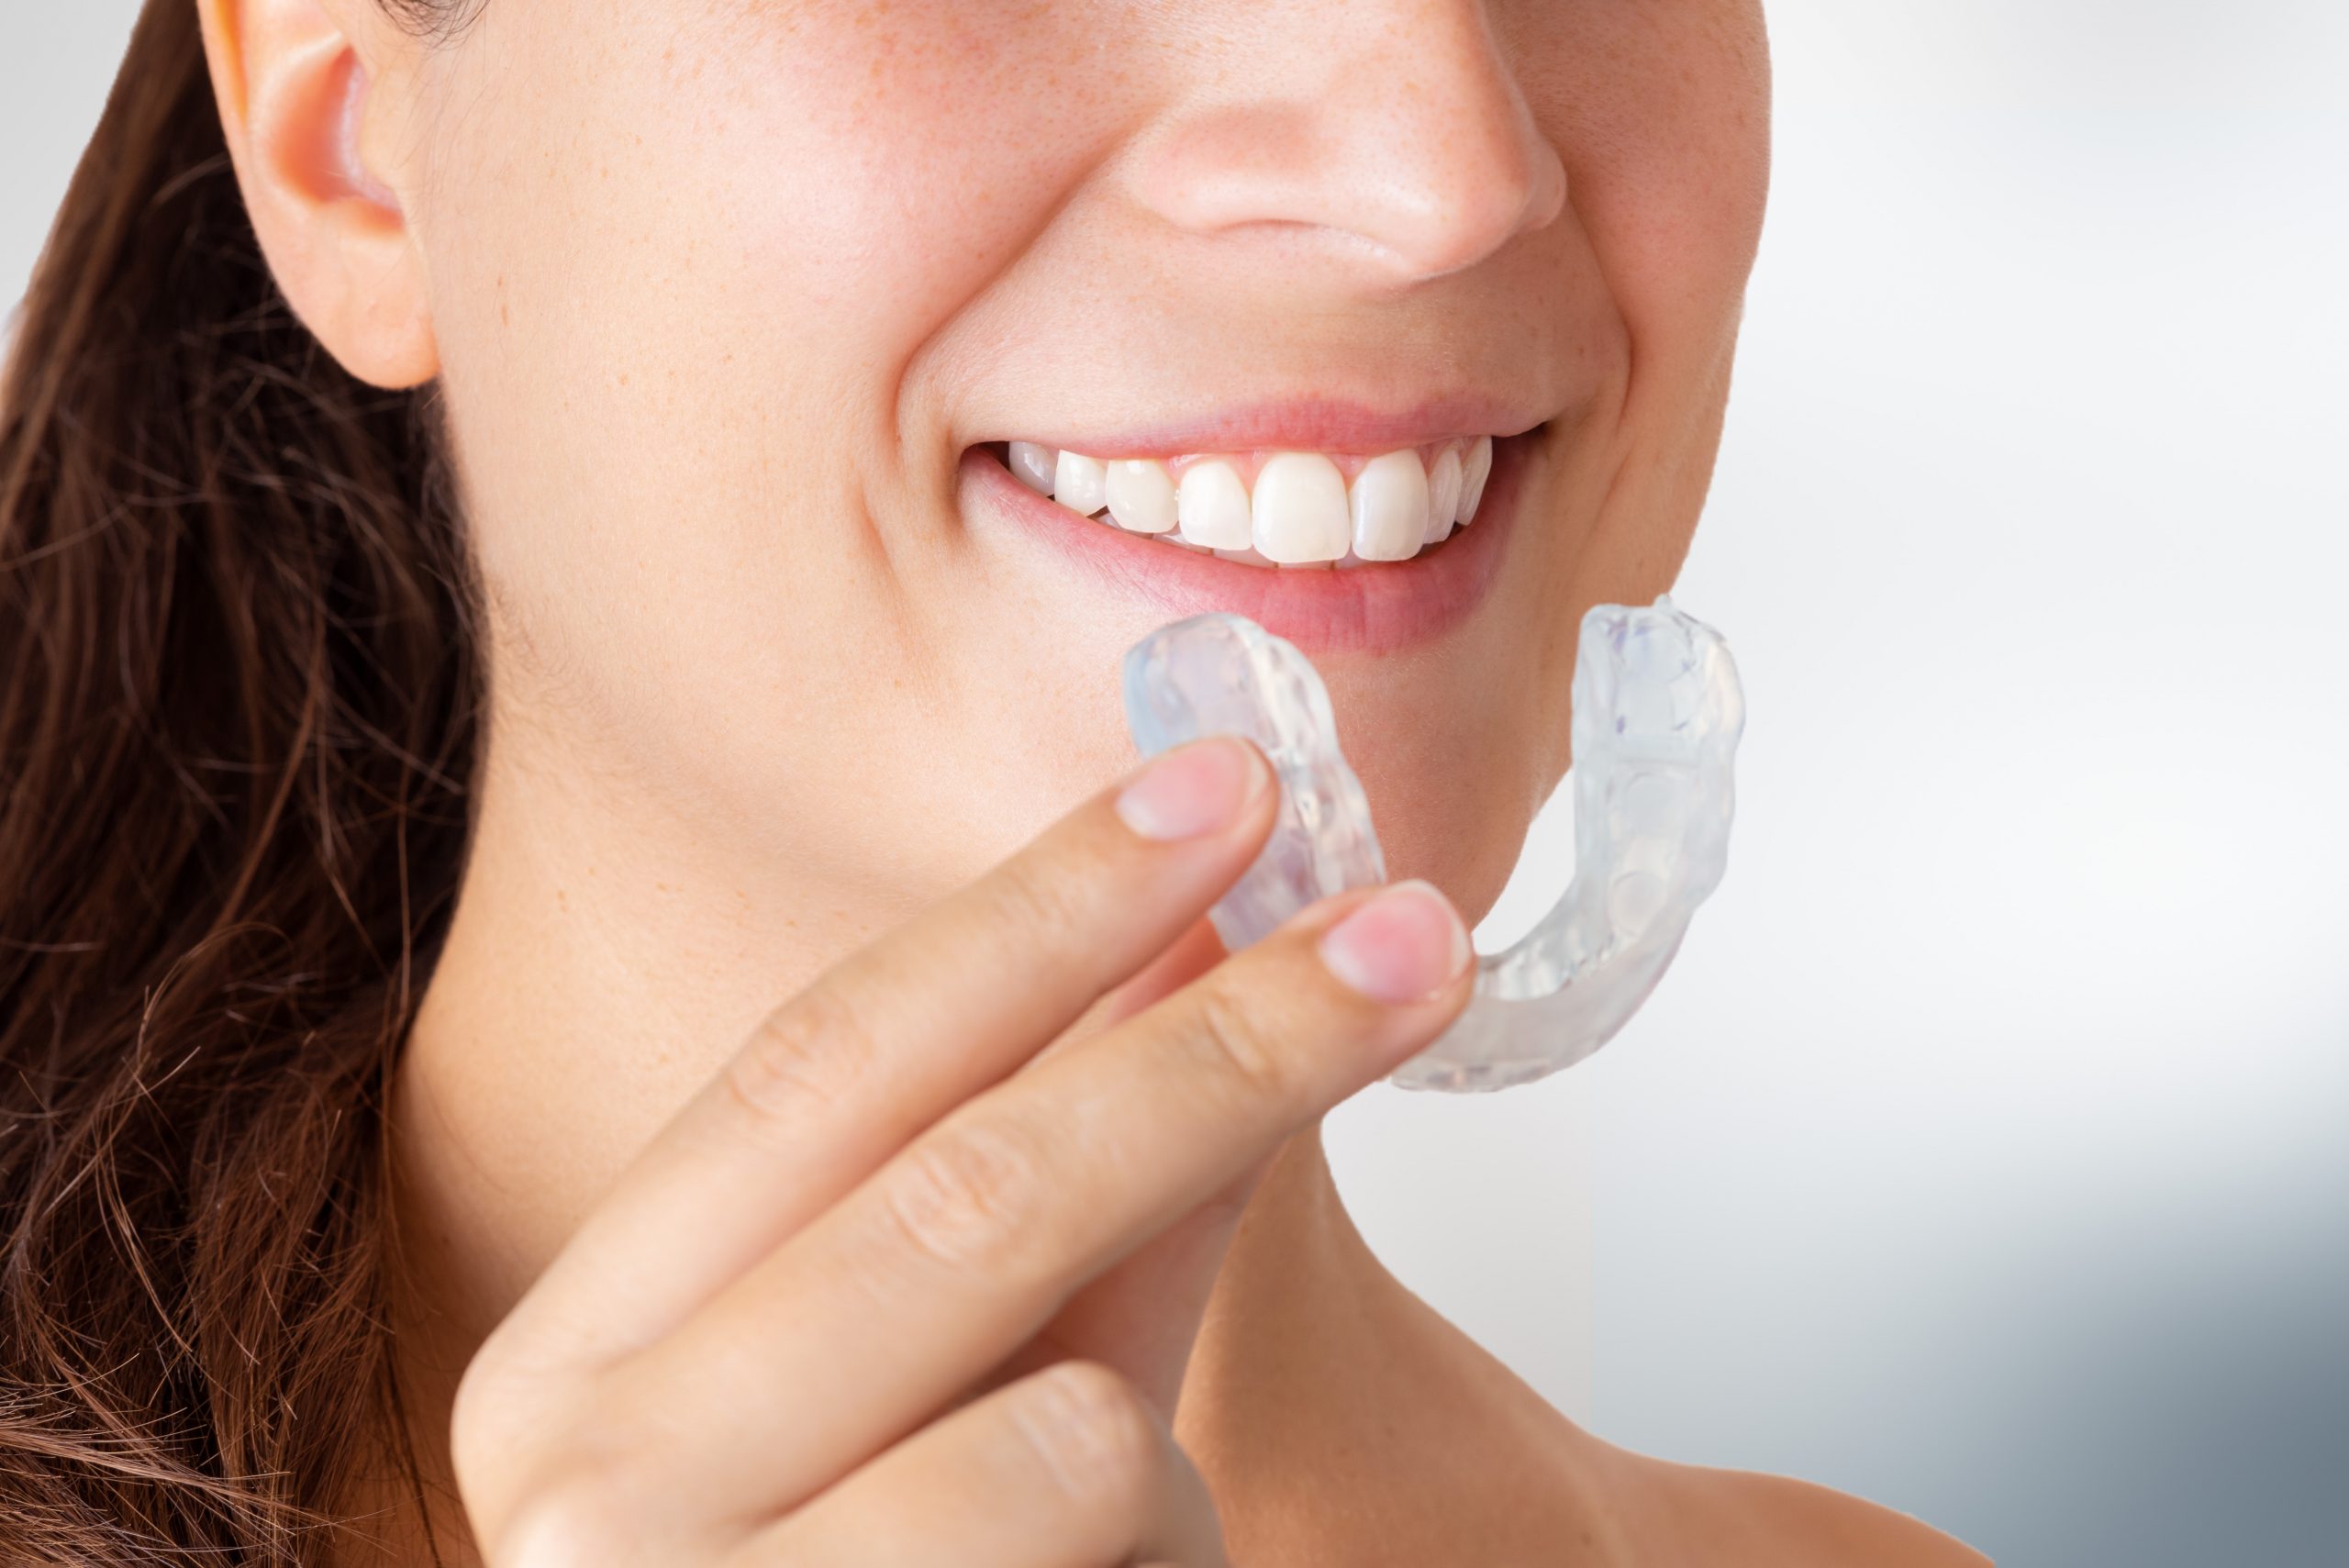 Woman wearing orthodontic silicone trainer. Invisible braces aligner. Mobile orthodontic appliance for dental correction. Placing a bite plate in mouth to save teeth from grinding caused by bruxism.